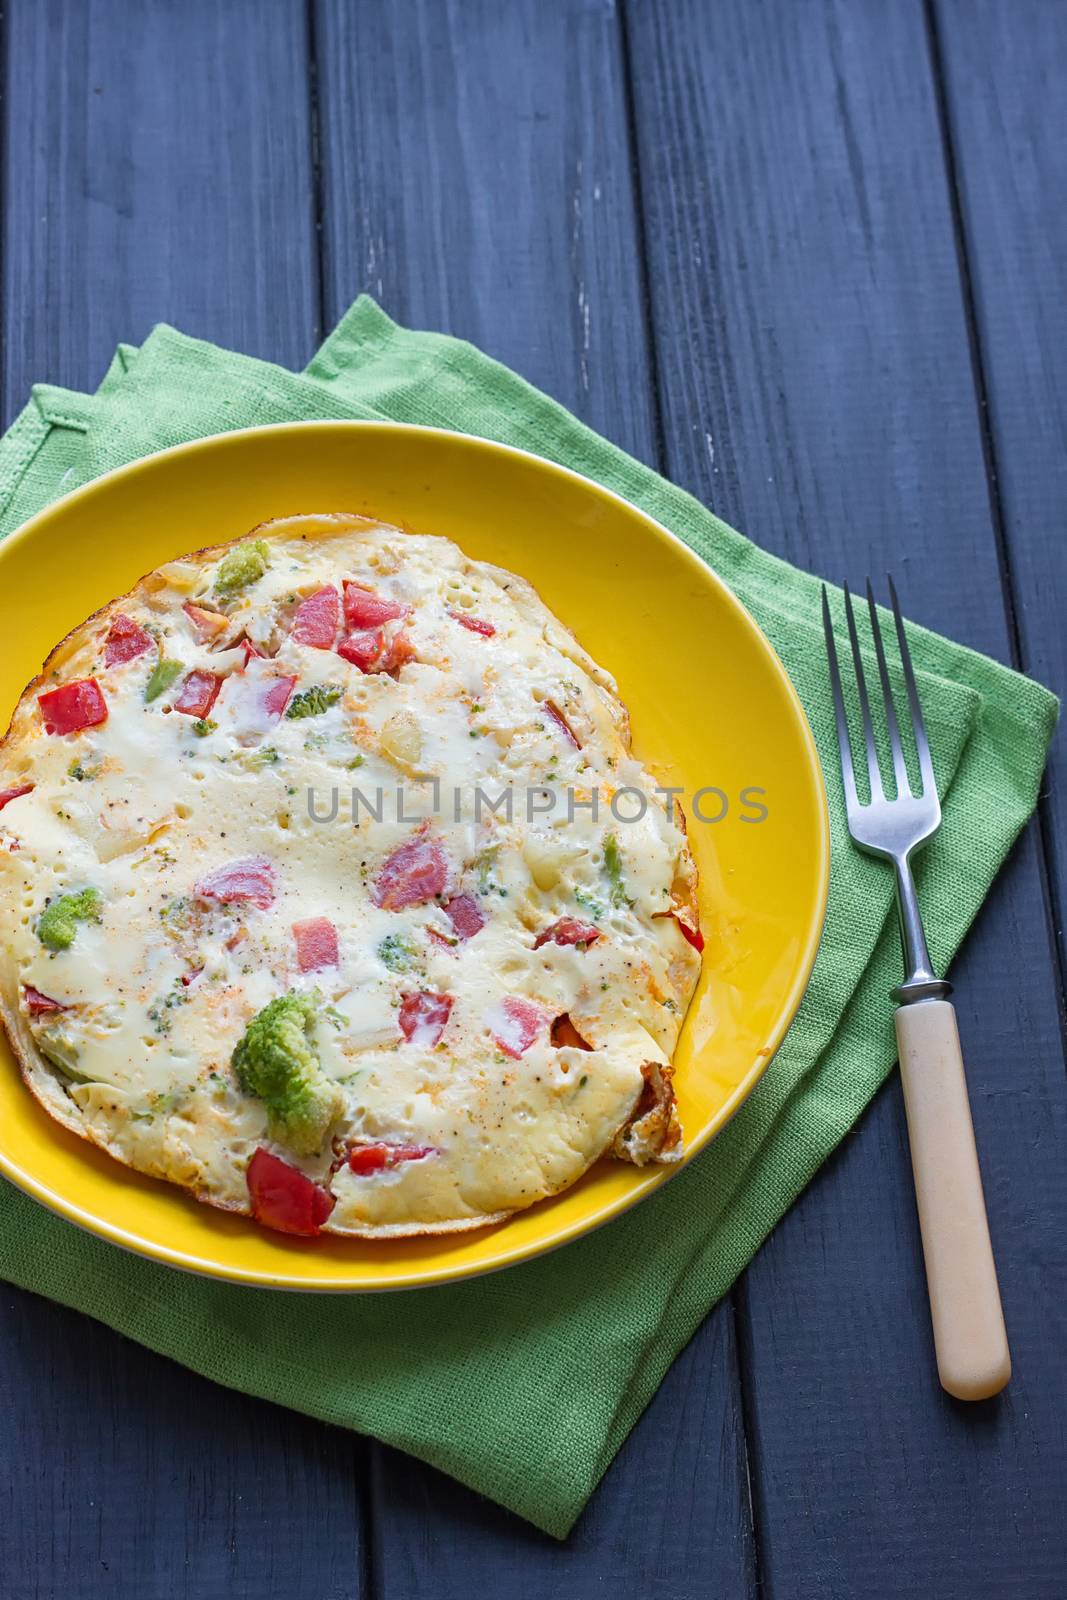 omelette from chicken eggs with cheese, fresh vegetables - cucumber and tomato by victosha